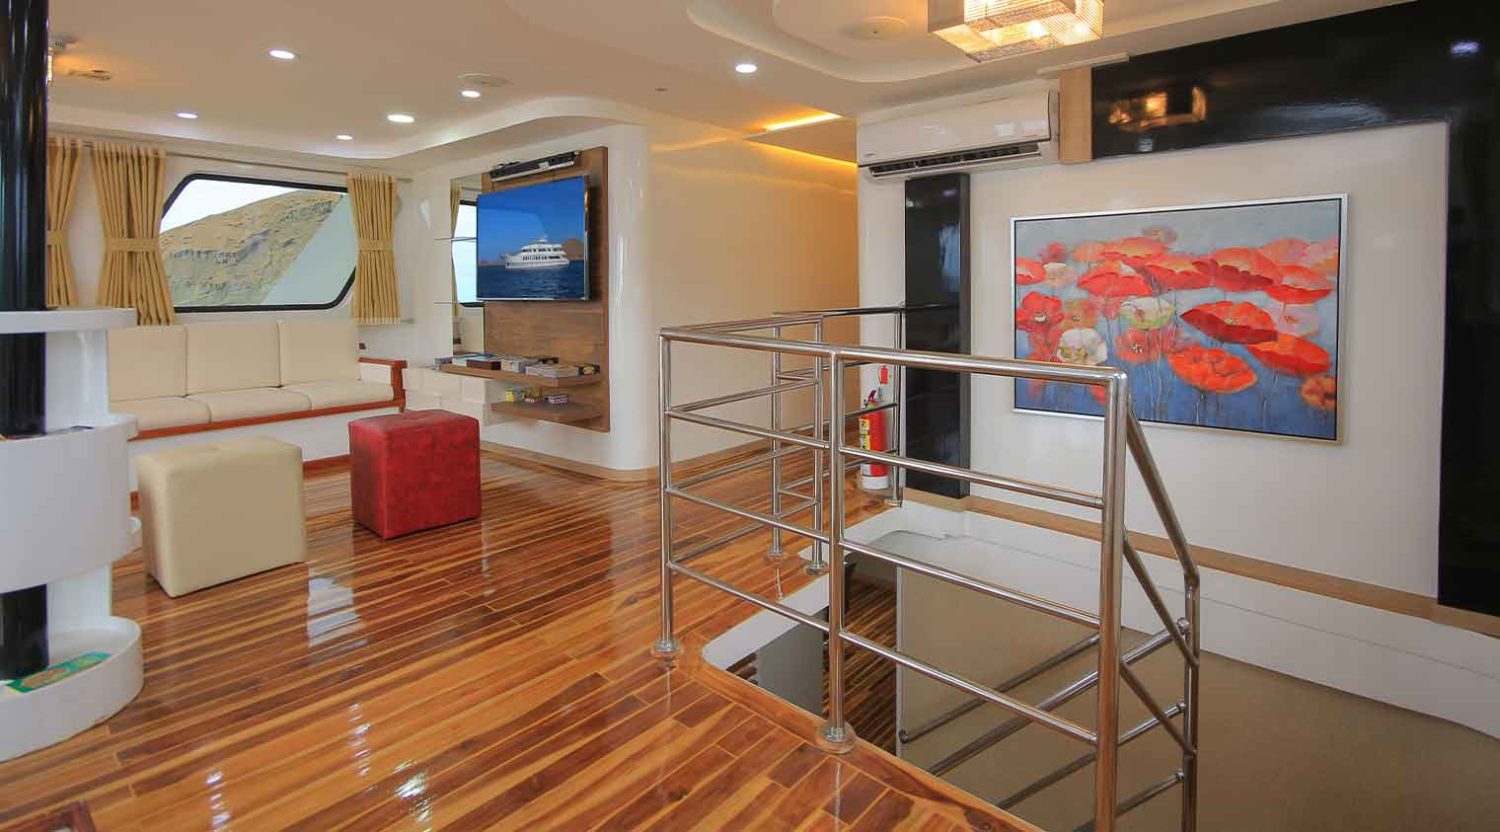 living room of grand queen beatriz yacht of galapagos islands tours